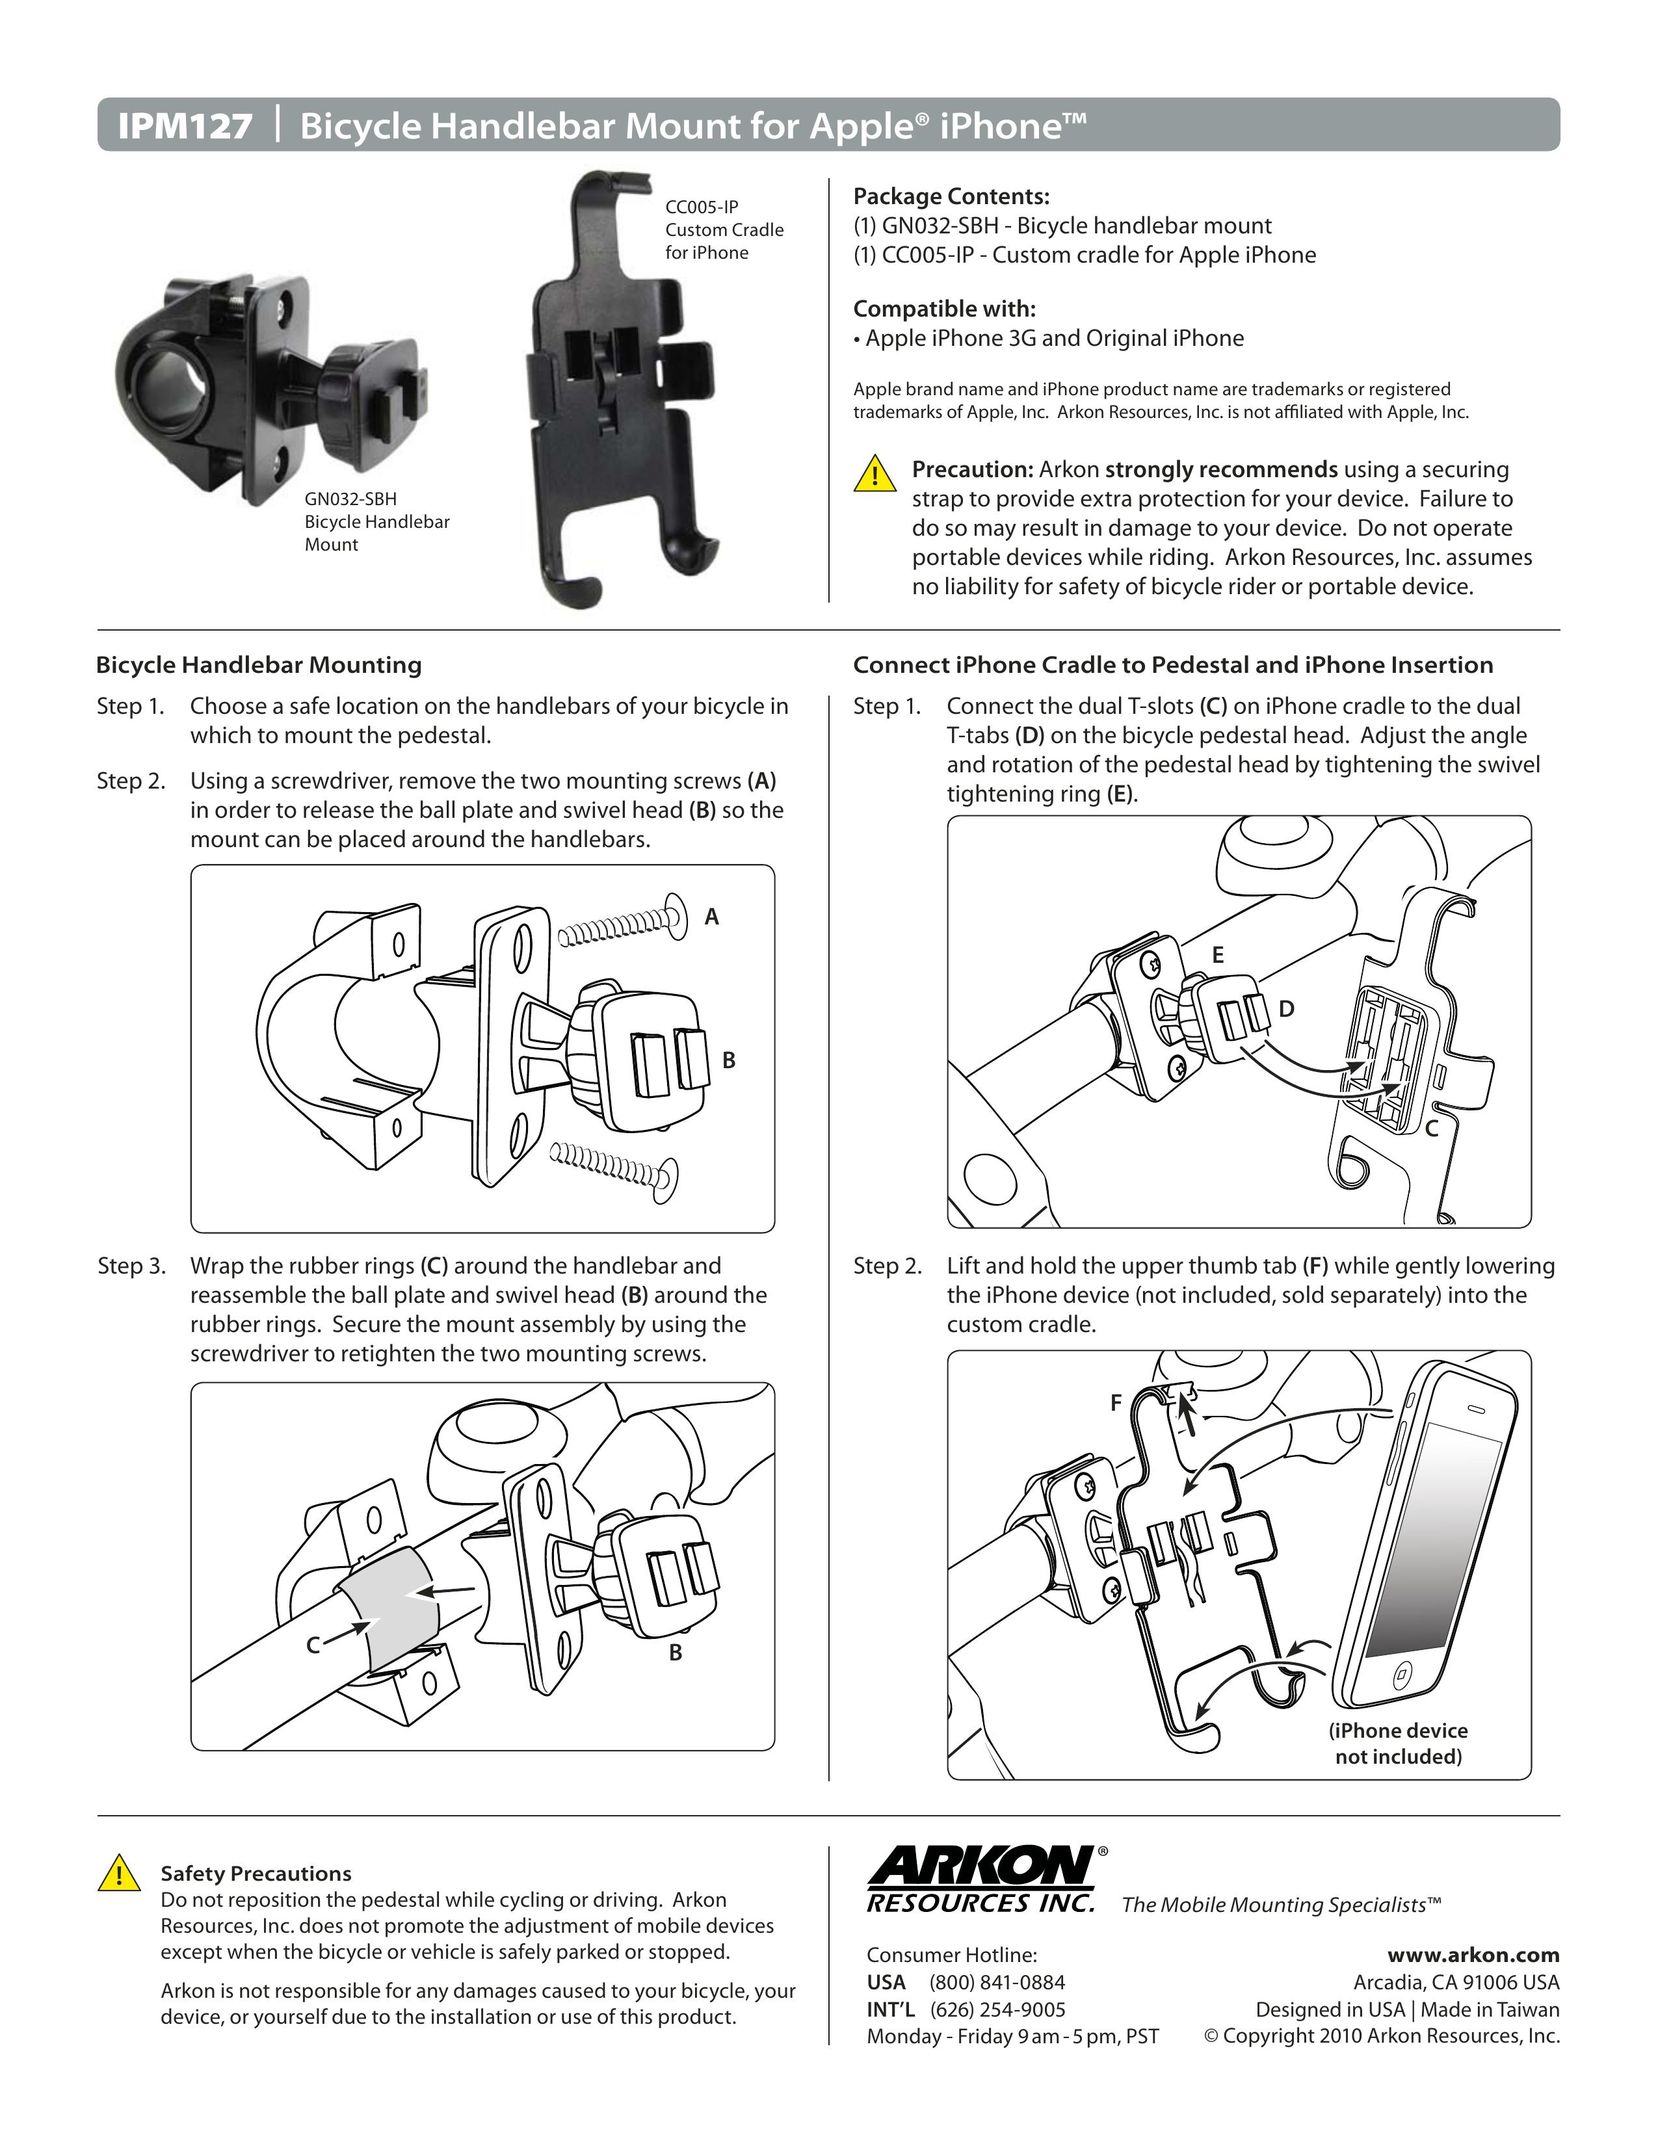 Black & Decker IPM127 Bicycle Accessories User Manual (Page 1)